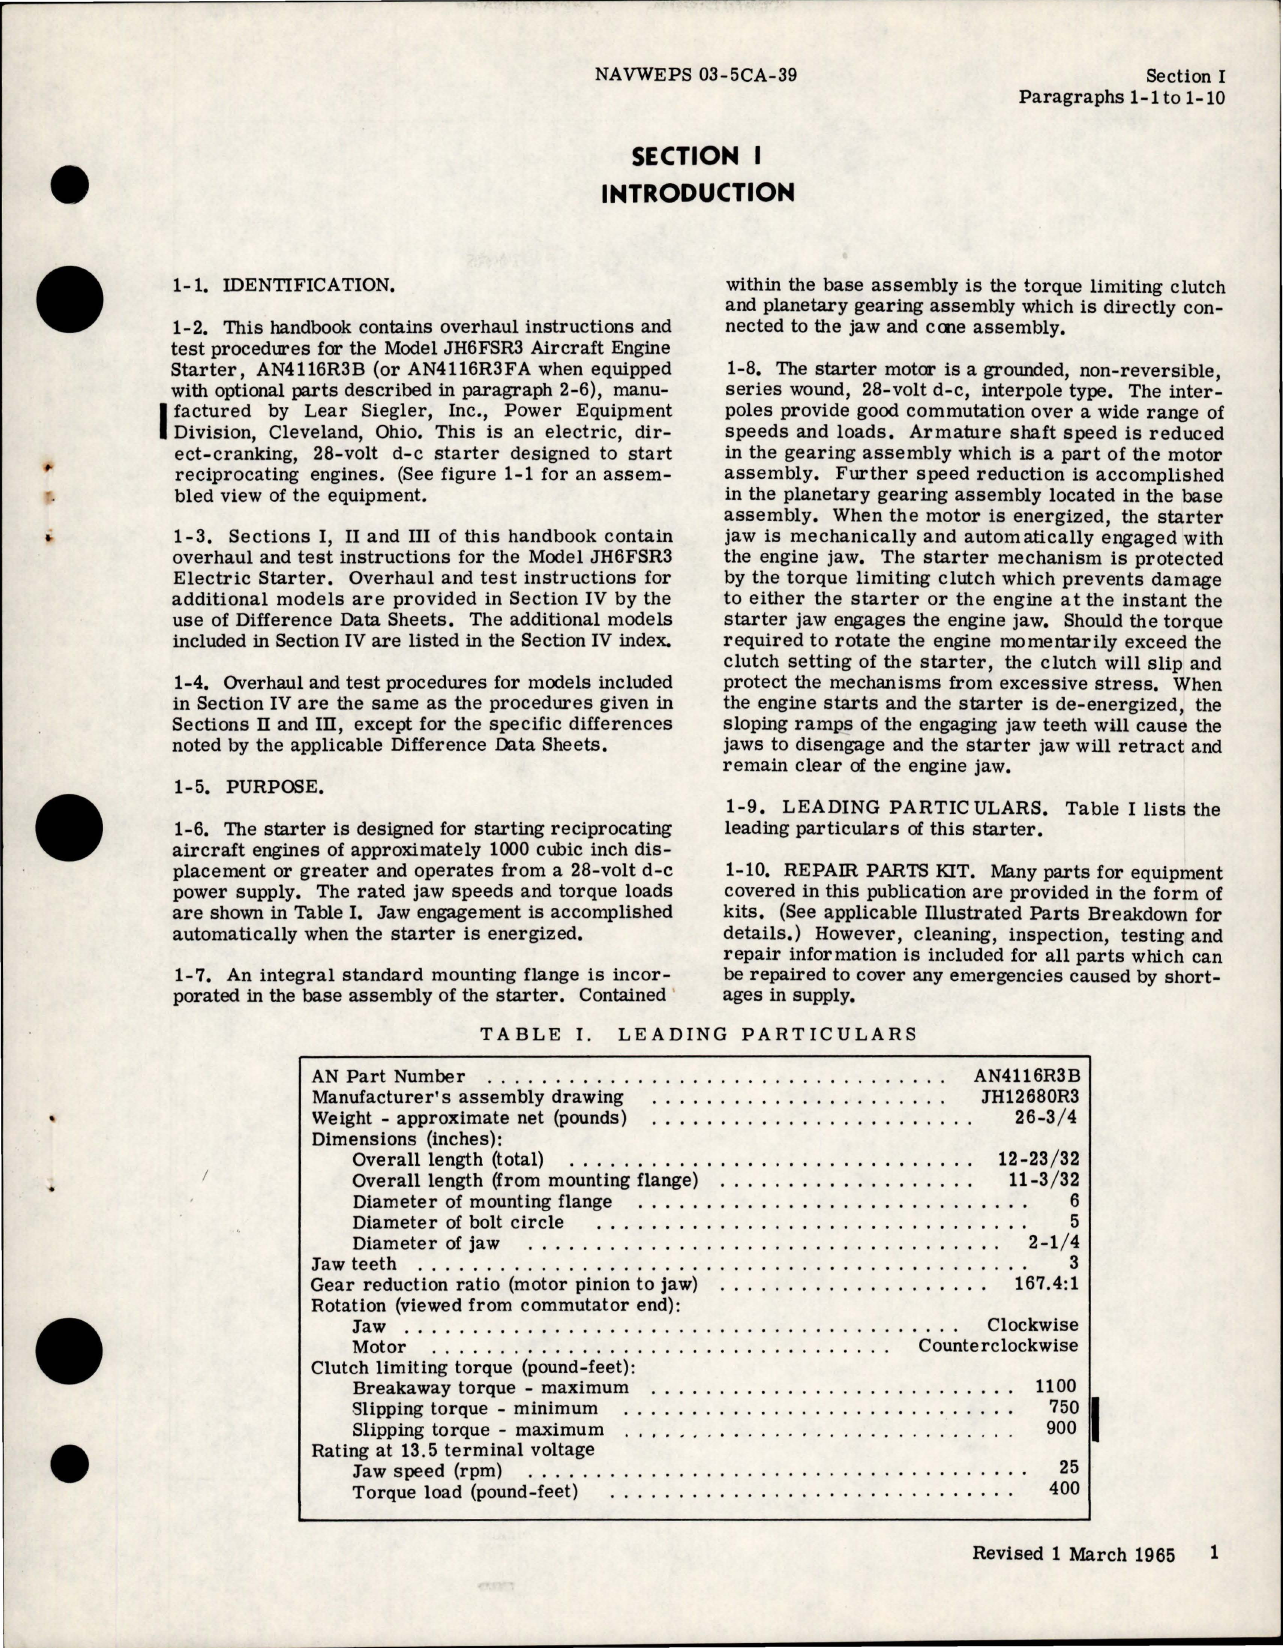 Sample page 5 from AirCorps Library document: Overhaul Instructions for Aircraft Engine Starters 